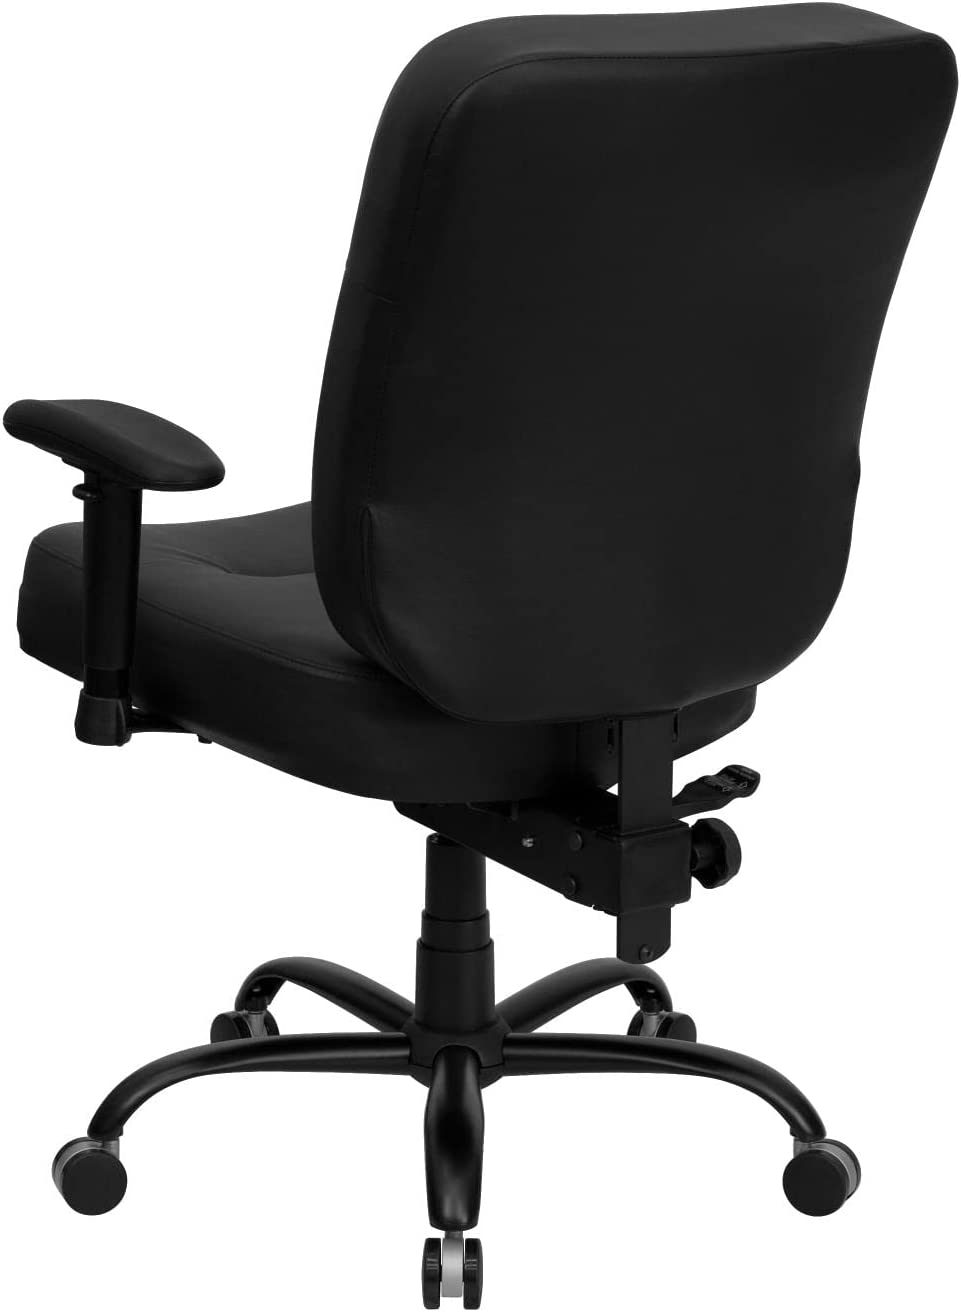 Flash Furniture HERCULES Series Big &amp; Tall 400 lb. Rated Black LeatherSoft Executive Ergonomic Office Chair with Adjustable Arms